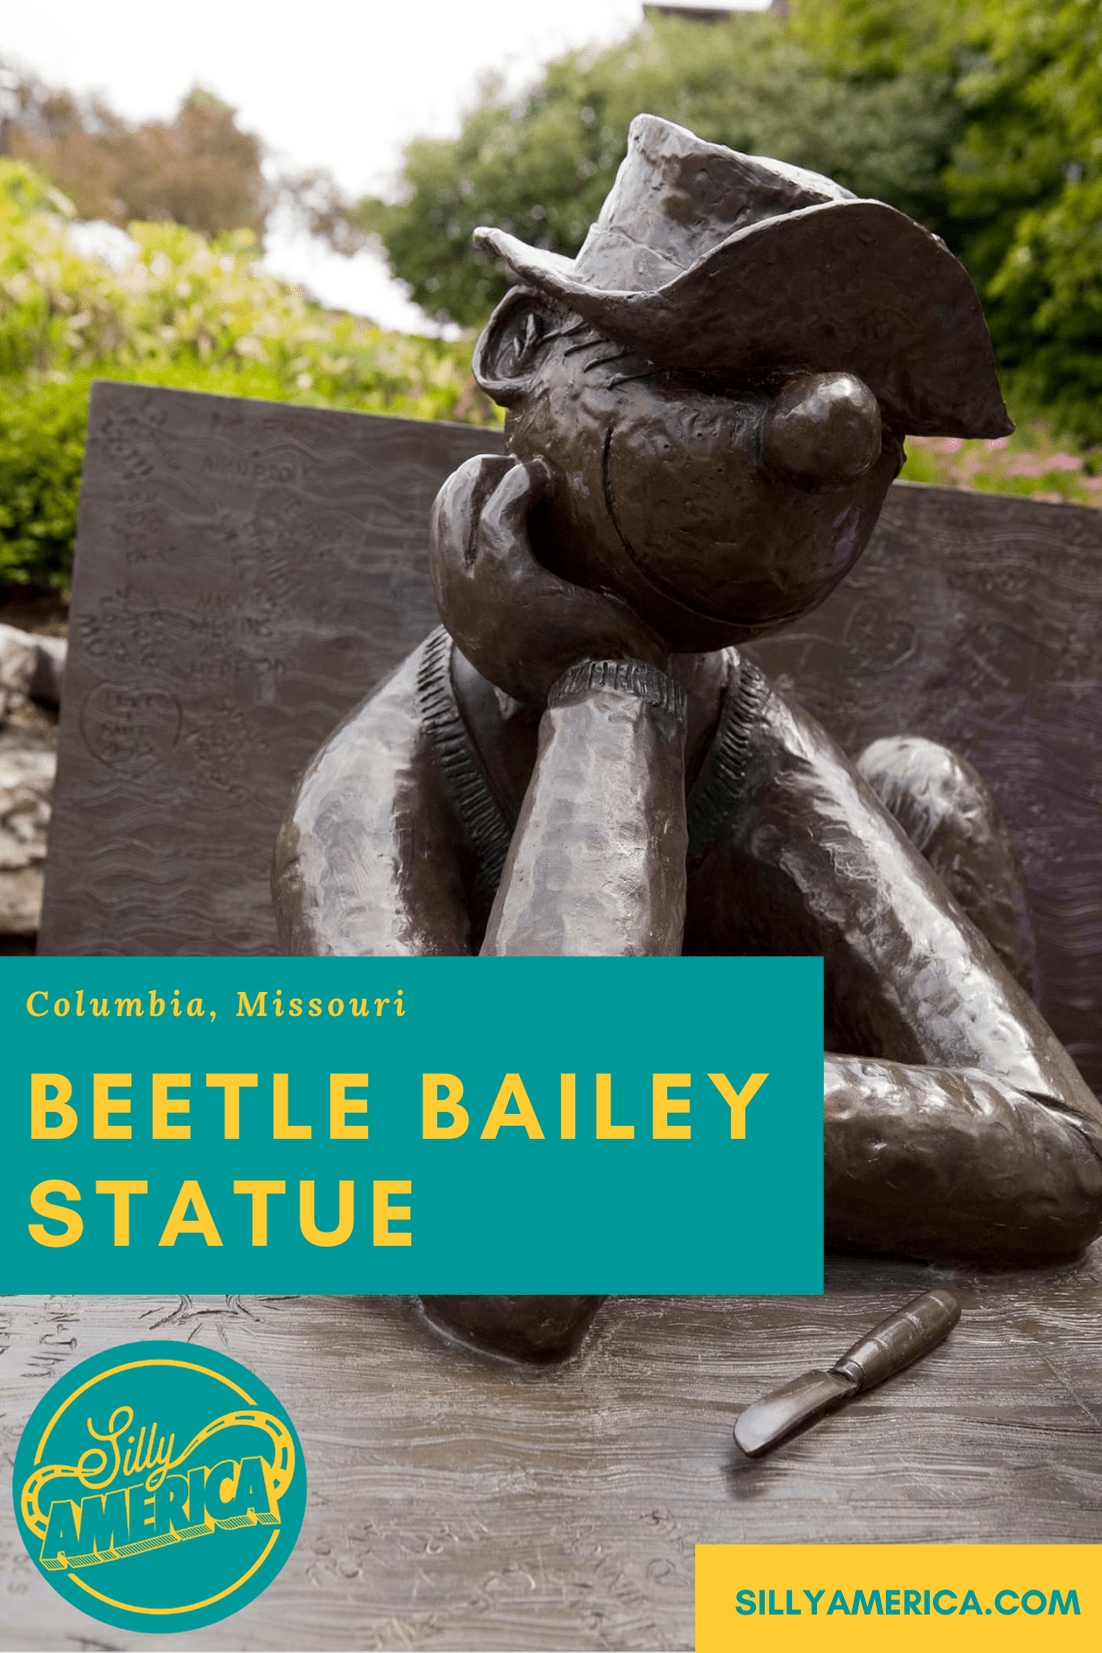 Celebrate comic strip artist and writer Mort Walker by visiting the Beetle Bailey Statue in Columbia, Missouri - a roadside attraction at the University of Missouri. #MissouriRoadsideAttractions #MissouriRoadsideAttraction #RoadsideAttractions #RoadsideAttraction #RoadTrip #MissouriRoadTrip #MissouriRoadTripMap #PlacestoVisitinMissouri #MissouriRoadTripIdeas #MissouriTravelRoadTrip #RoadsideAttraction #RoadsideAttractions